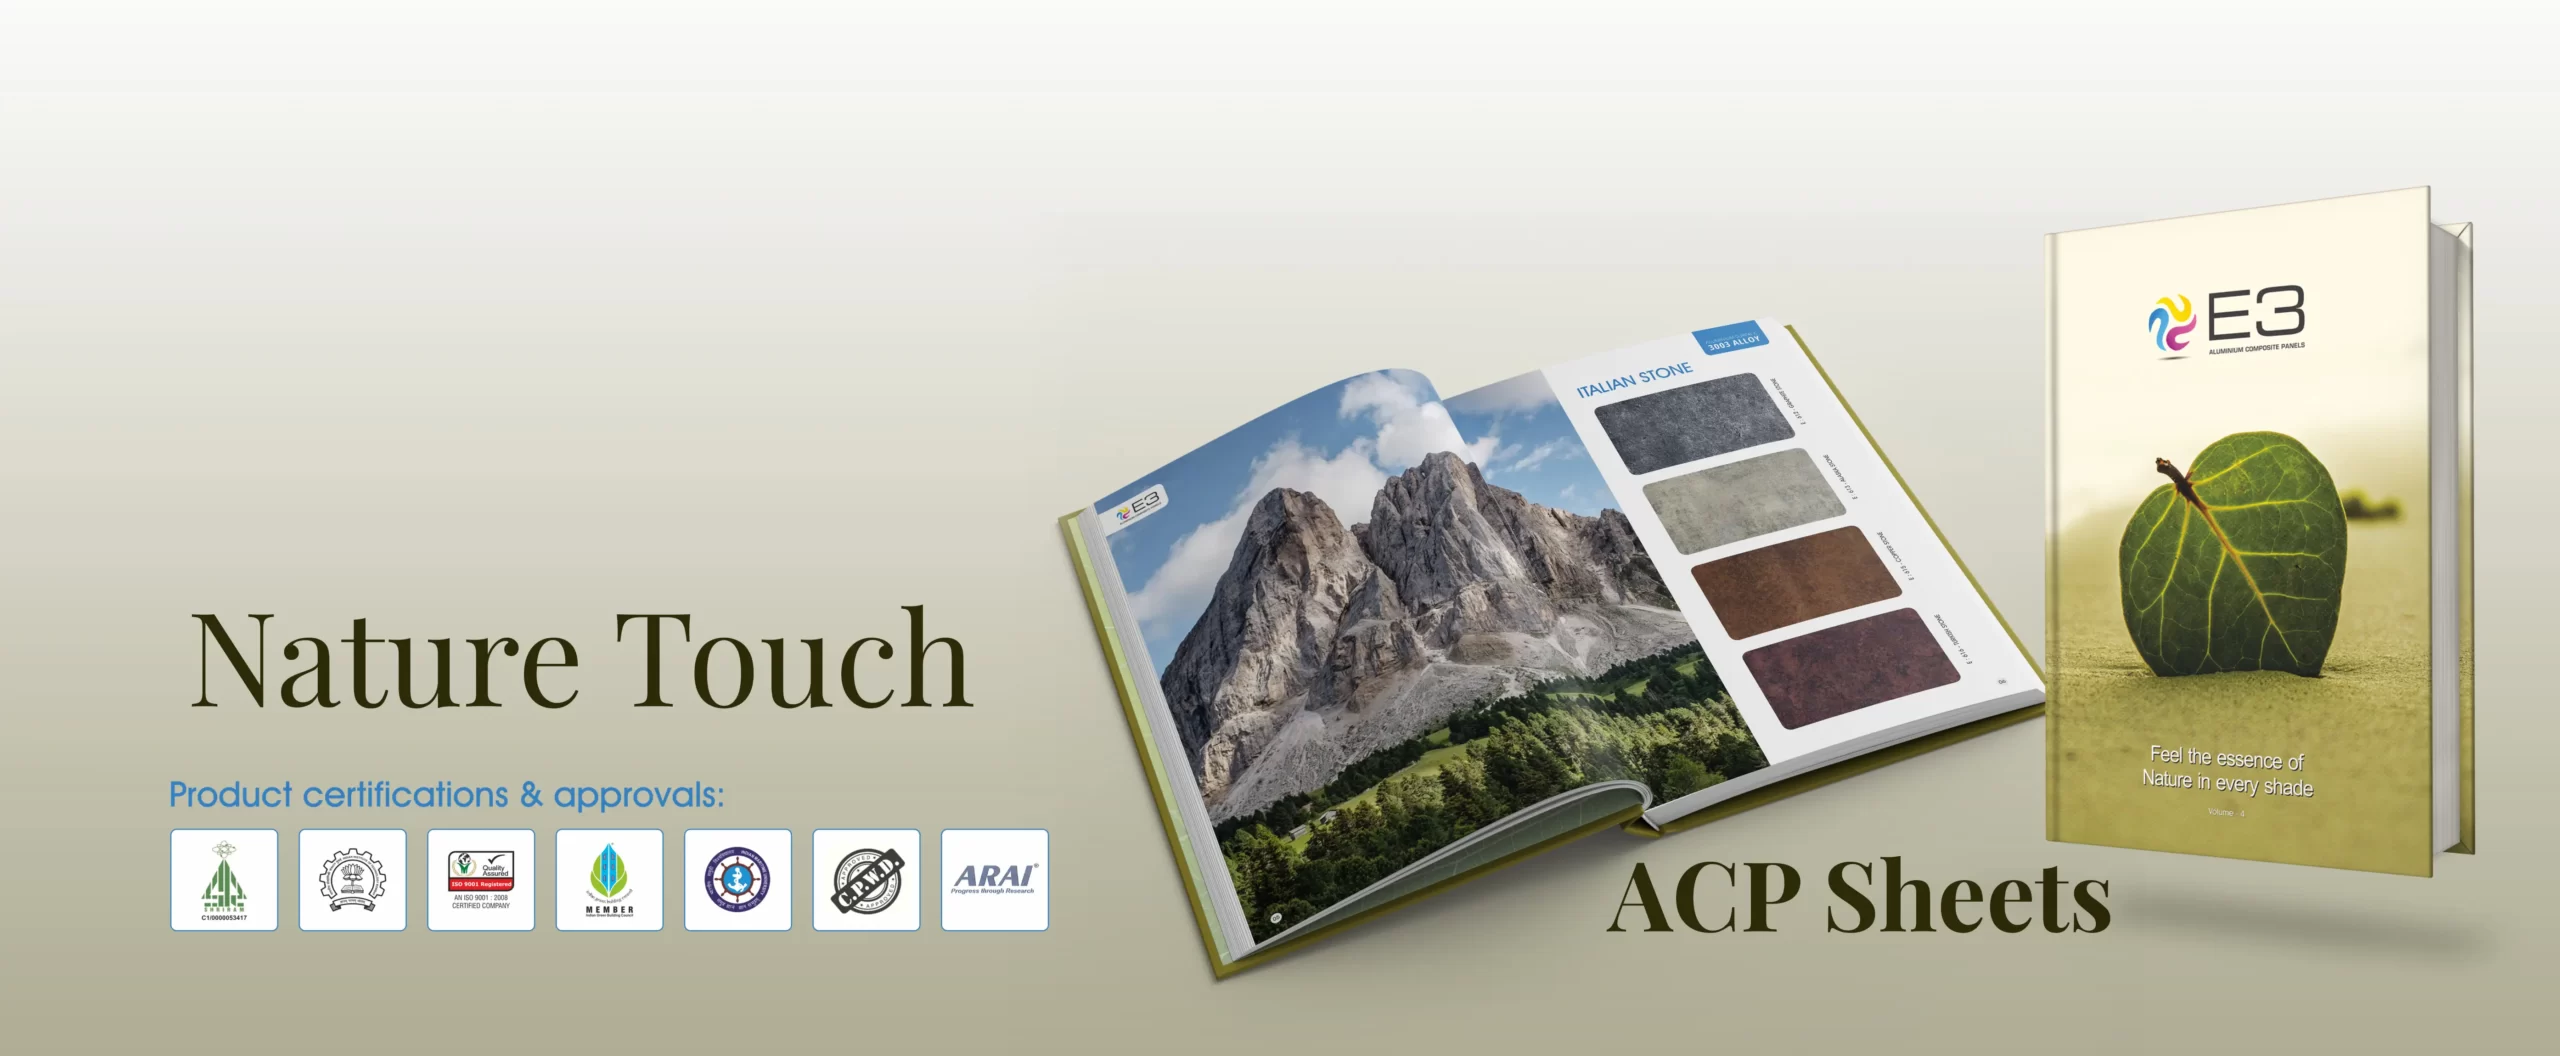 natural touch acp sheets